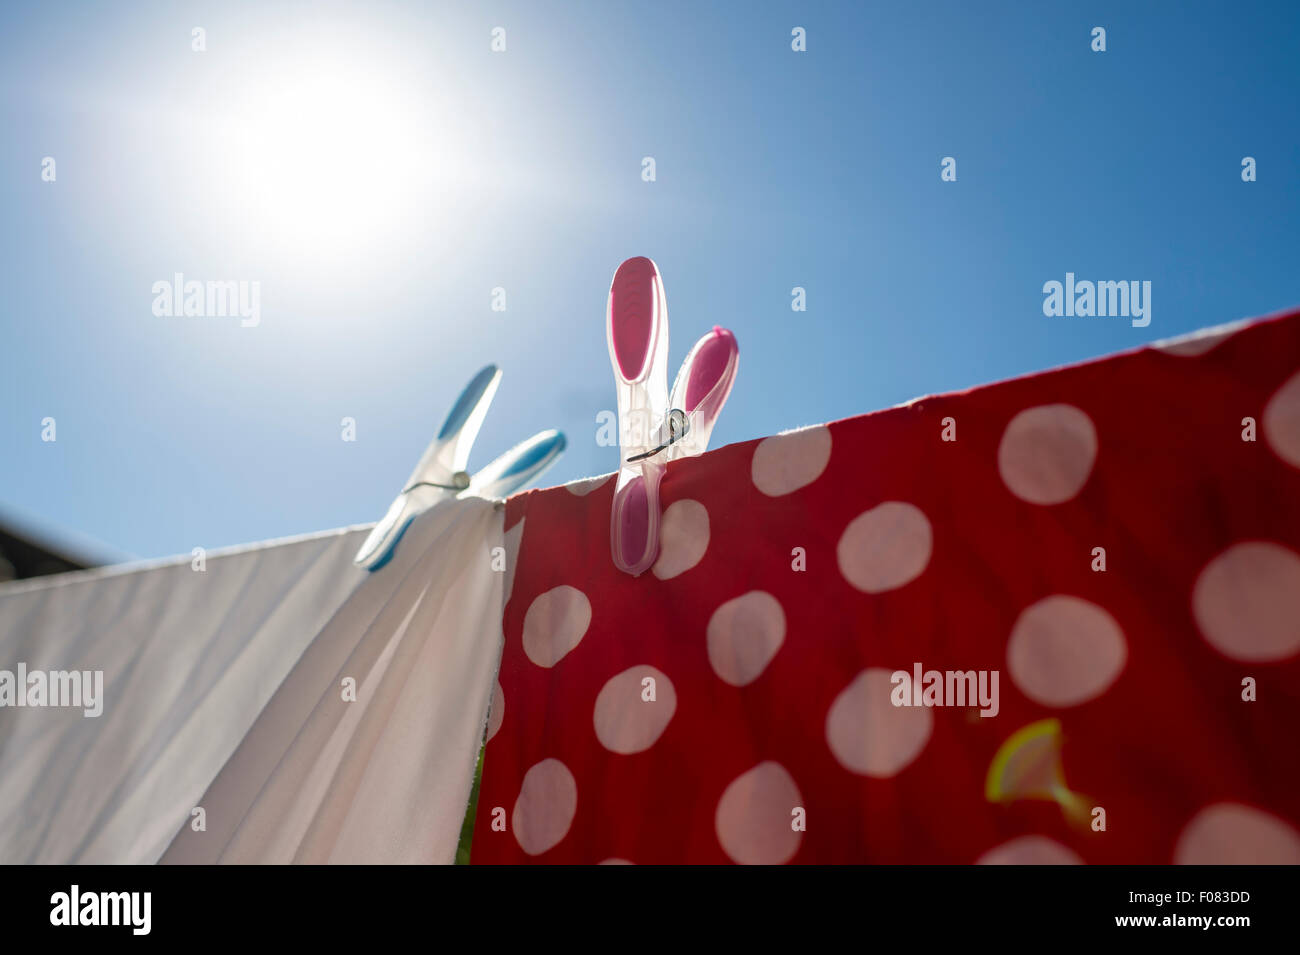 Red and white laundry drying in the sun pegged on washing line with coloured pegs. Stock Photo